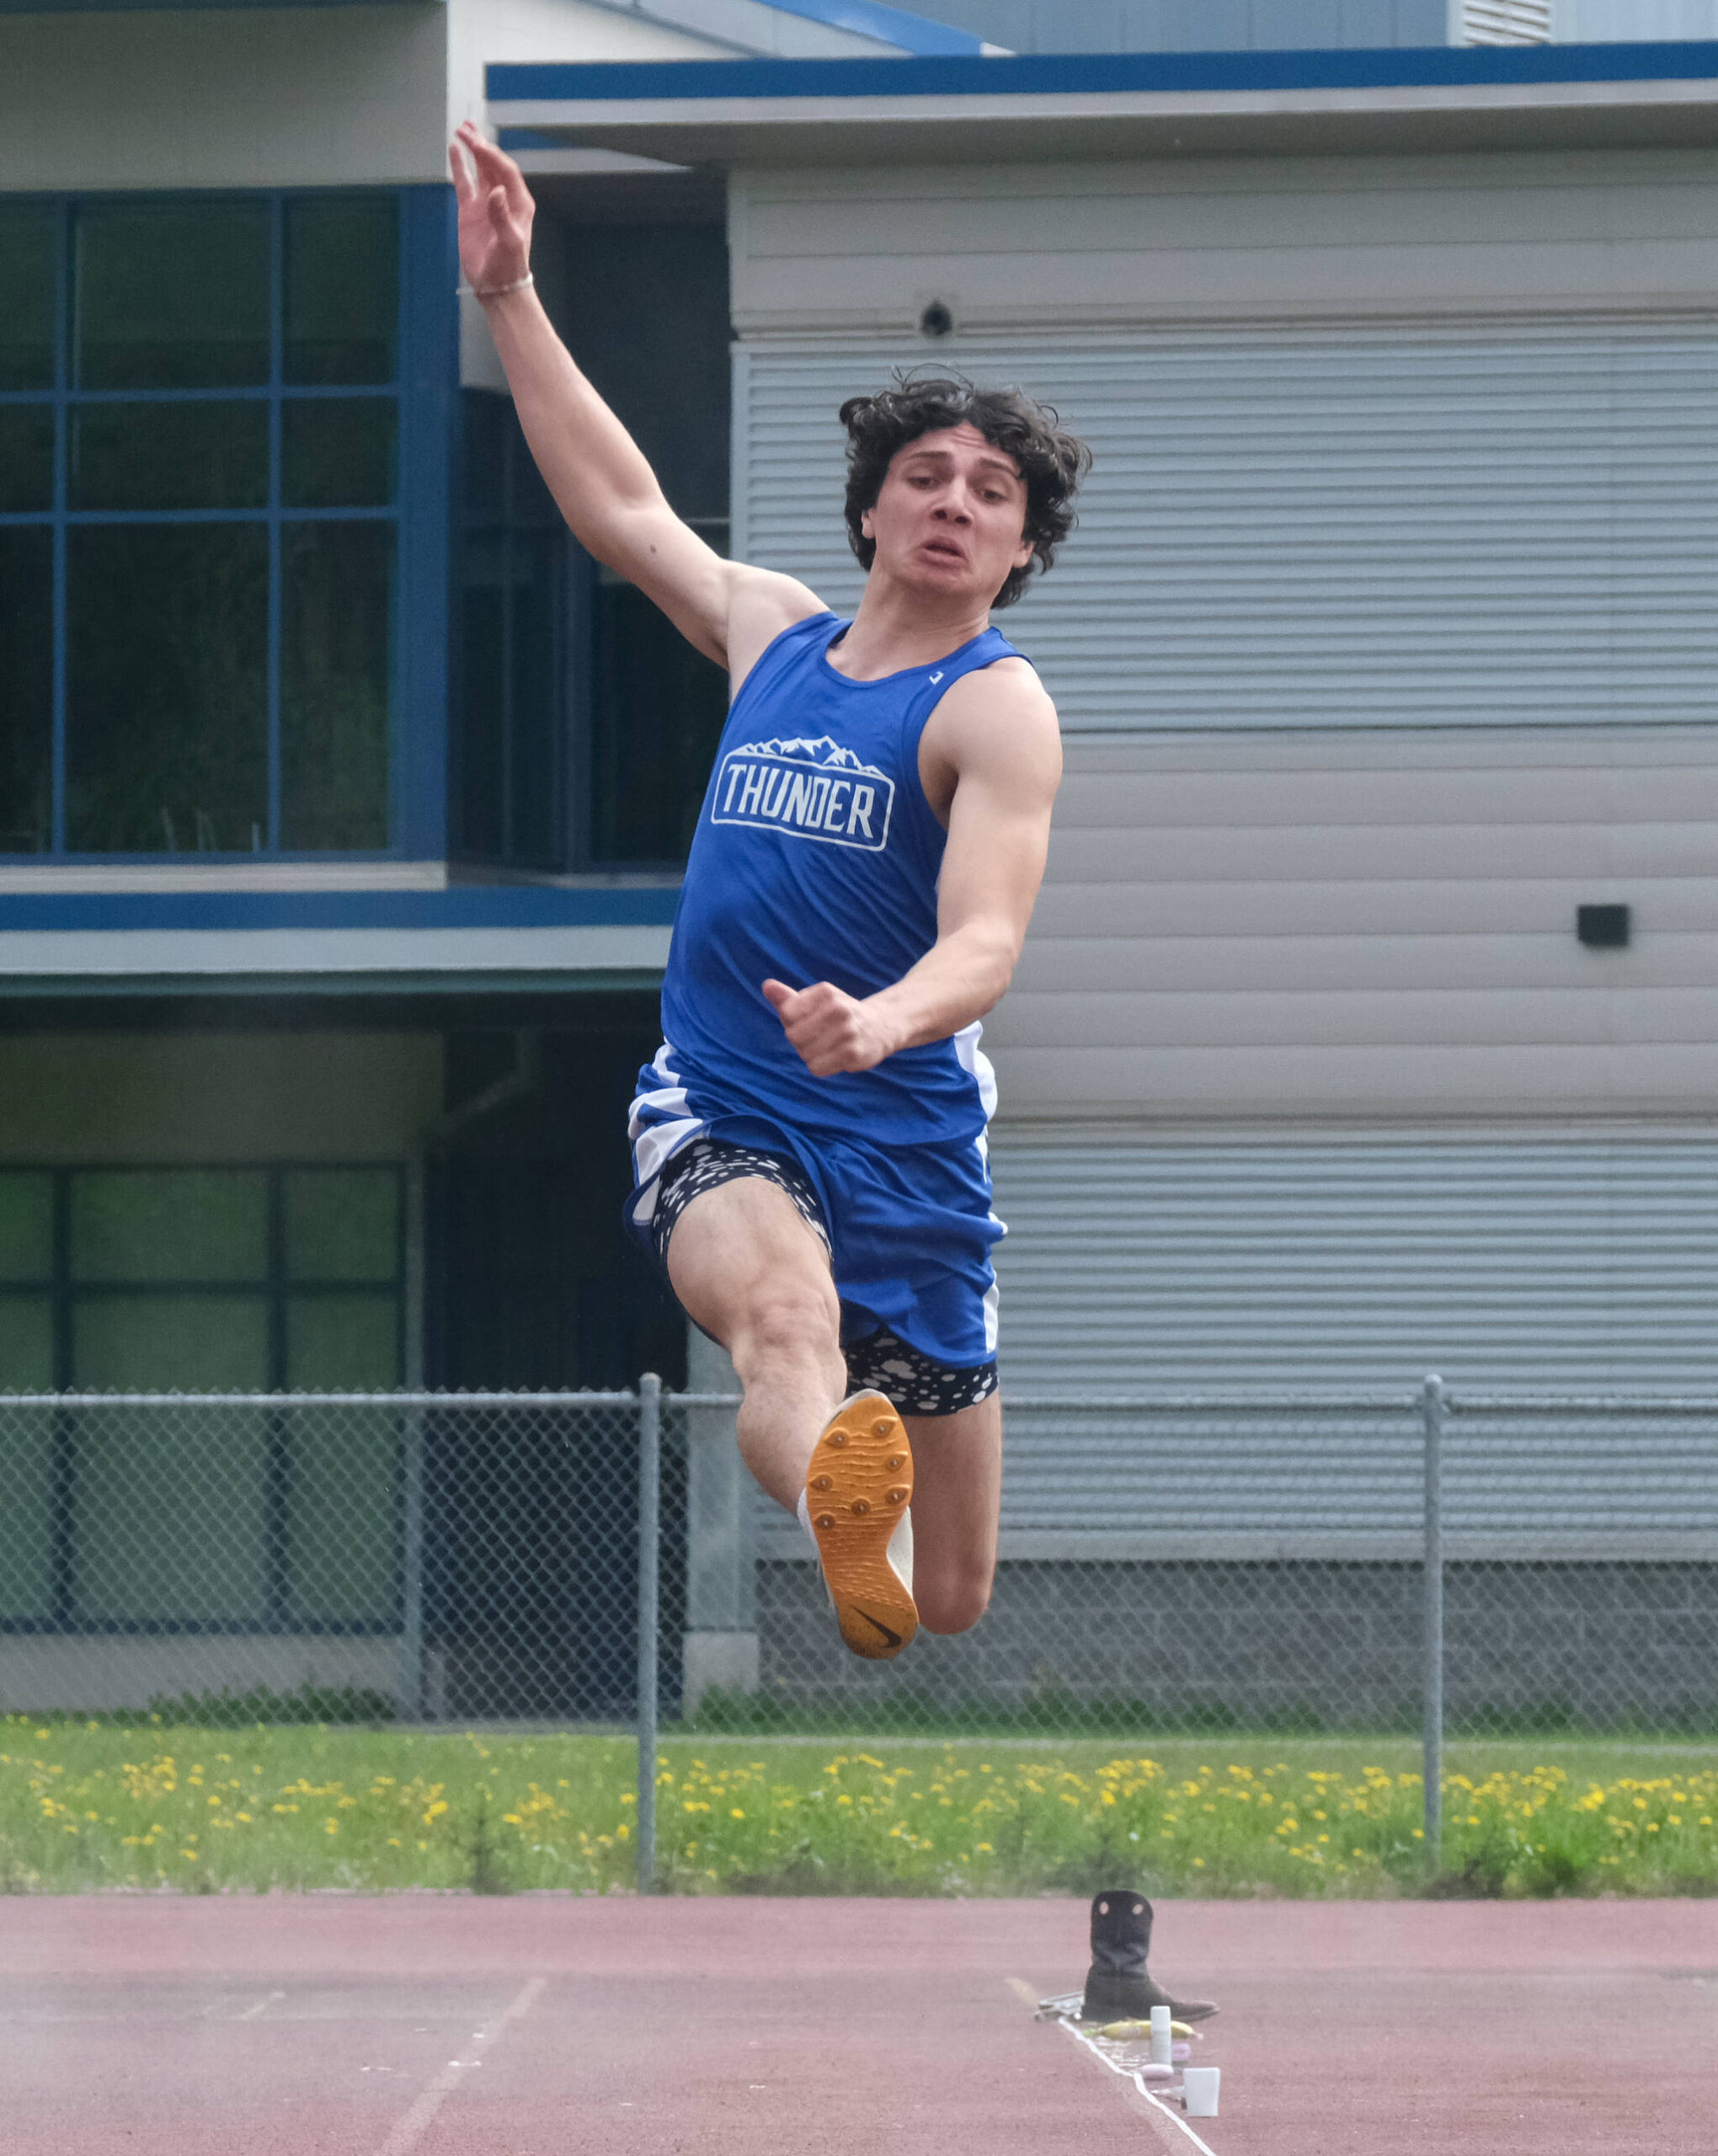 Thunder Mountain High School senior Chase Darbonne wins the Division I boys long jump during the Region V Track & Field Championships, Saturday, at TMHS. (Klas Stolpe / Juneau Empire)